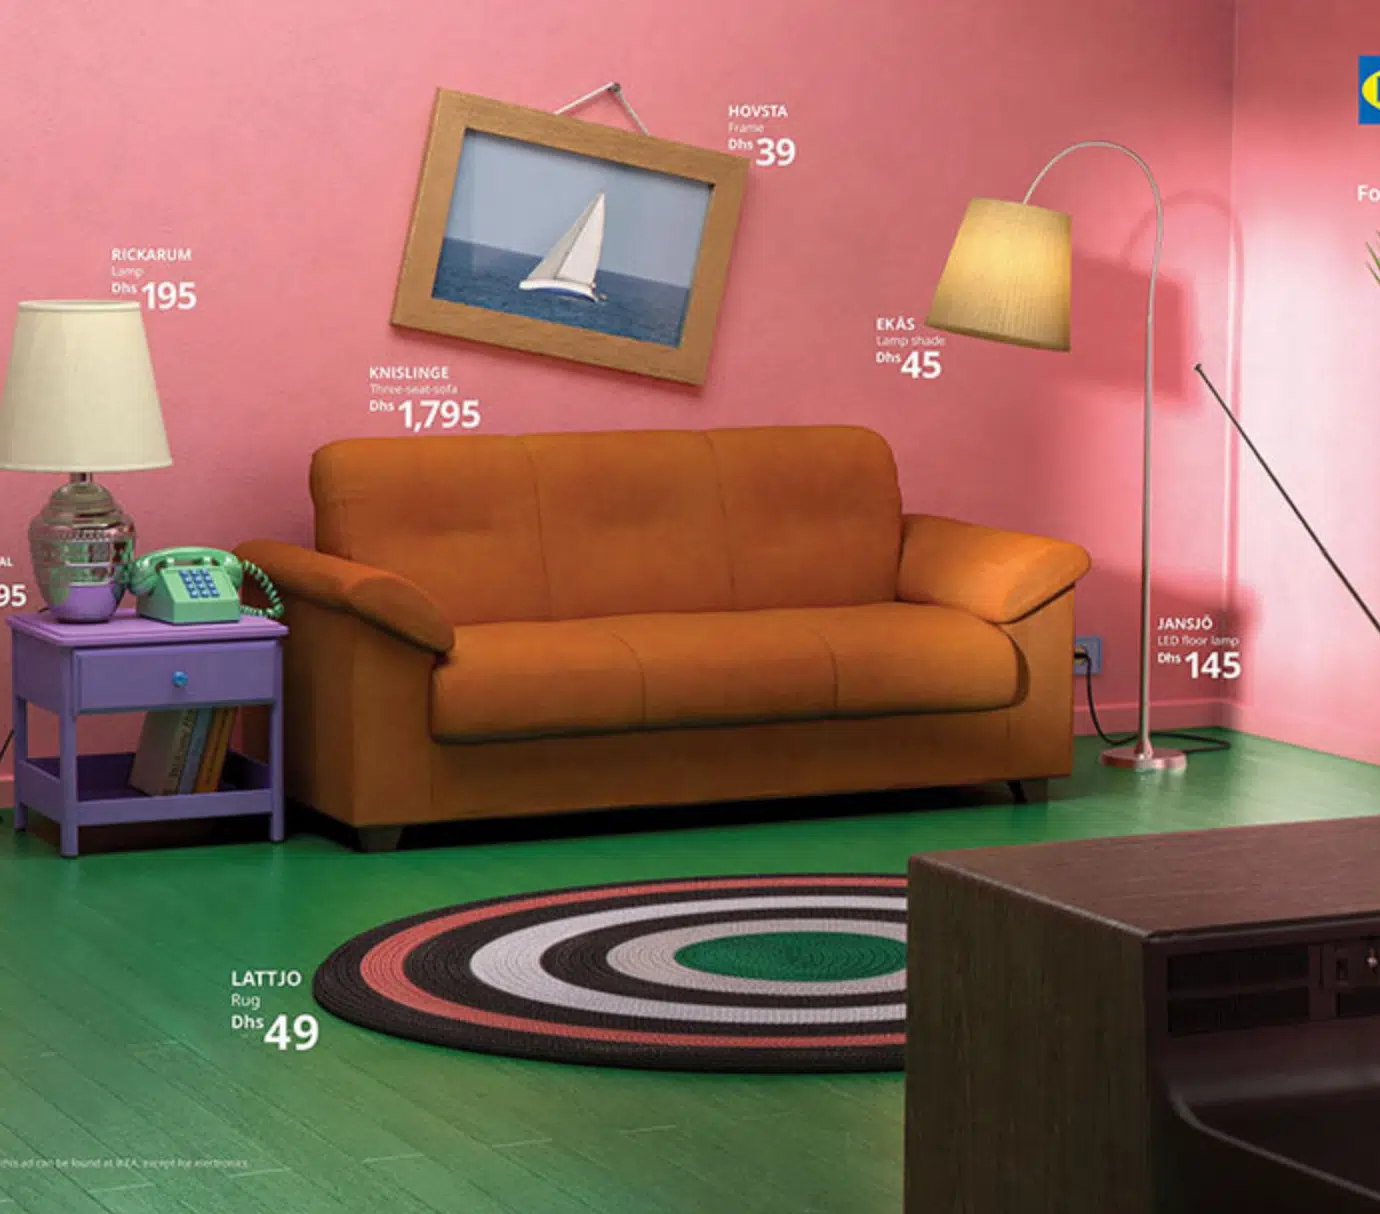 IKEA Recreates the Living Rooms From THE SIMPSONS, FRIENDS & STRANGER THINGS With Its Products